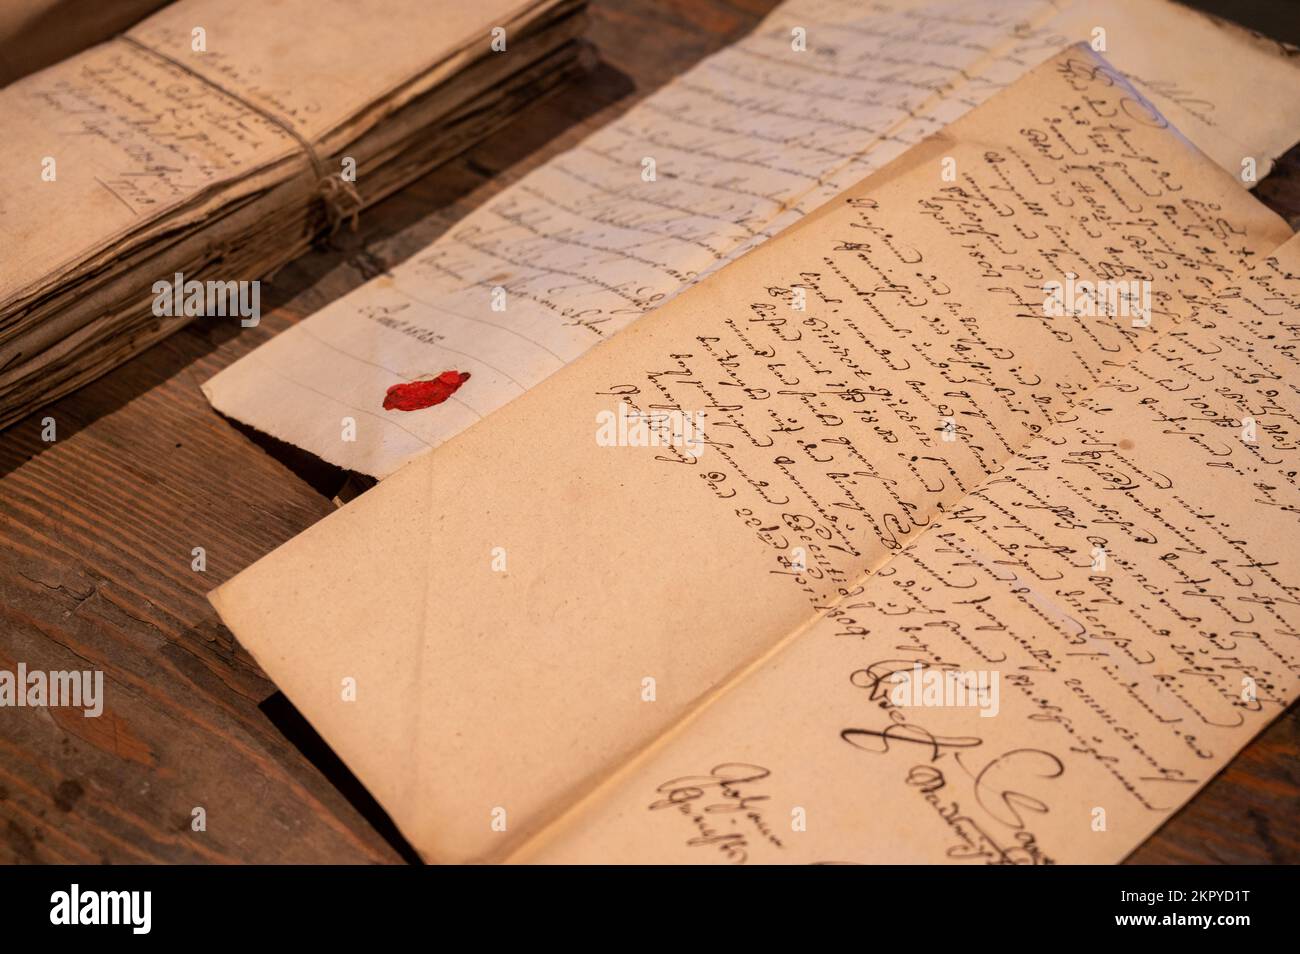 Original court sentences made by the judges of the city of Pressburg (today's Bratislava) dating to the 18th and the beginning of the 19th century. Stock Photo